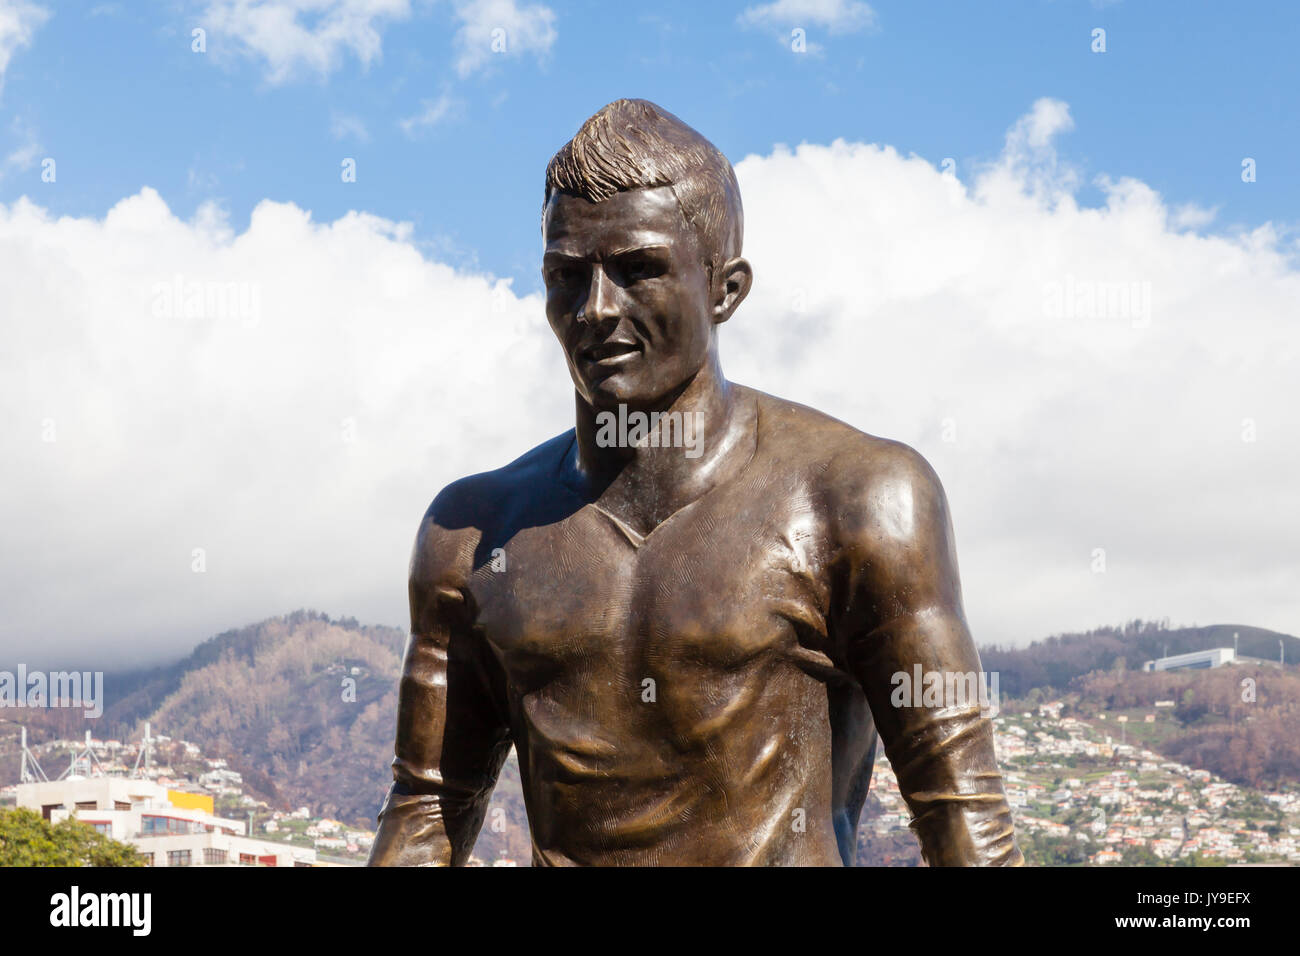 A statue of footballer Christiano Ronaldo is pictured on the Funchal waterfront on the Portuguese island of Madeira. Stock Photo